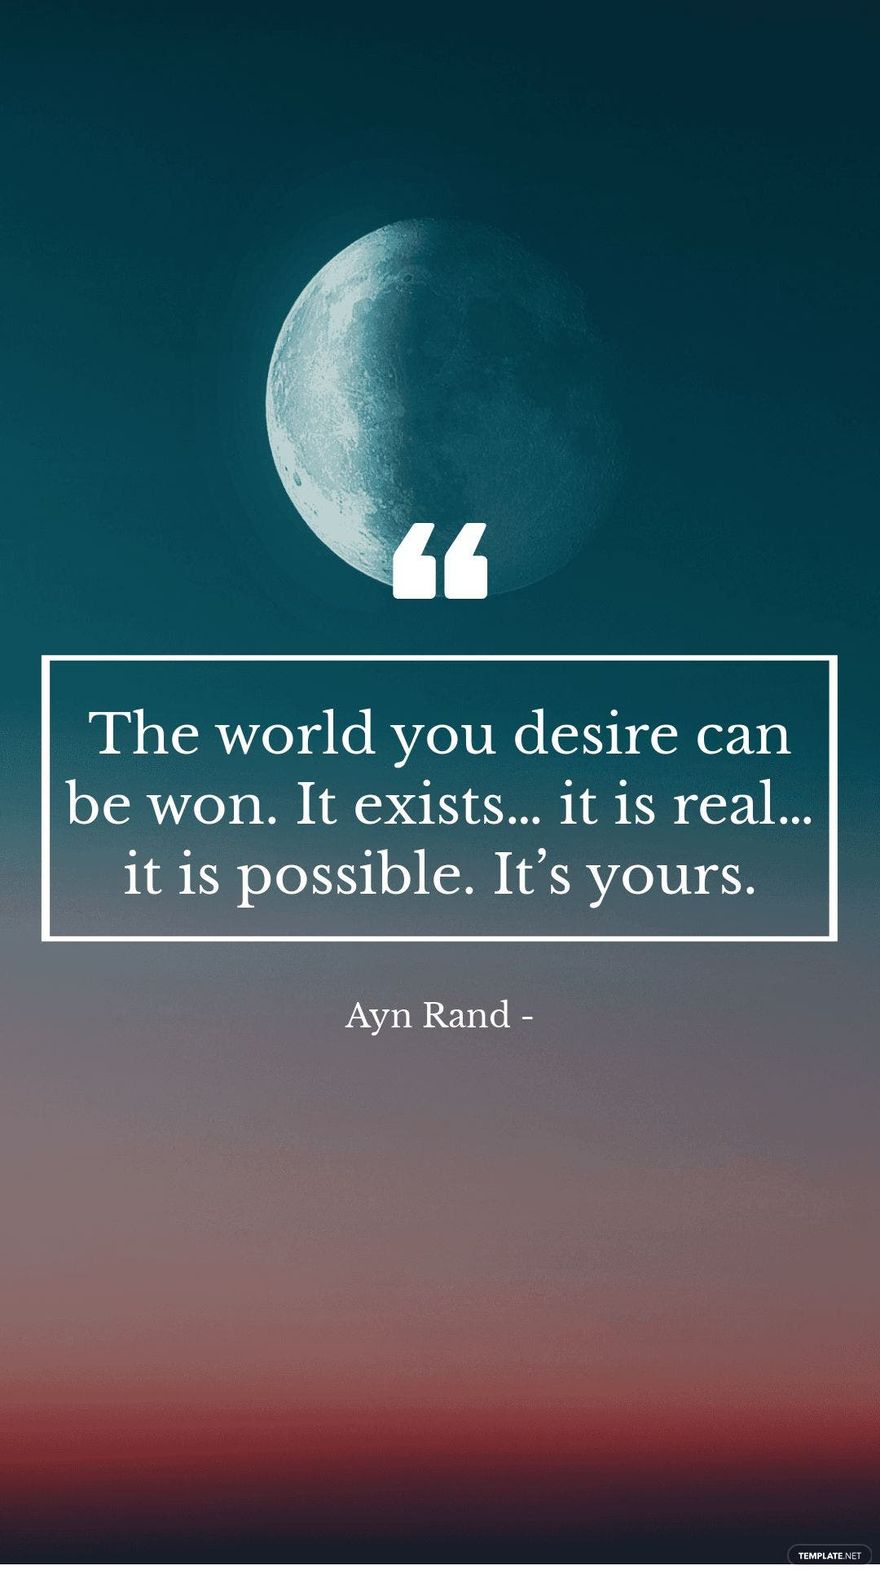 Ayn Rand - The world you desire can be won. It exists… it is real… it is possible. It’s yours.